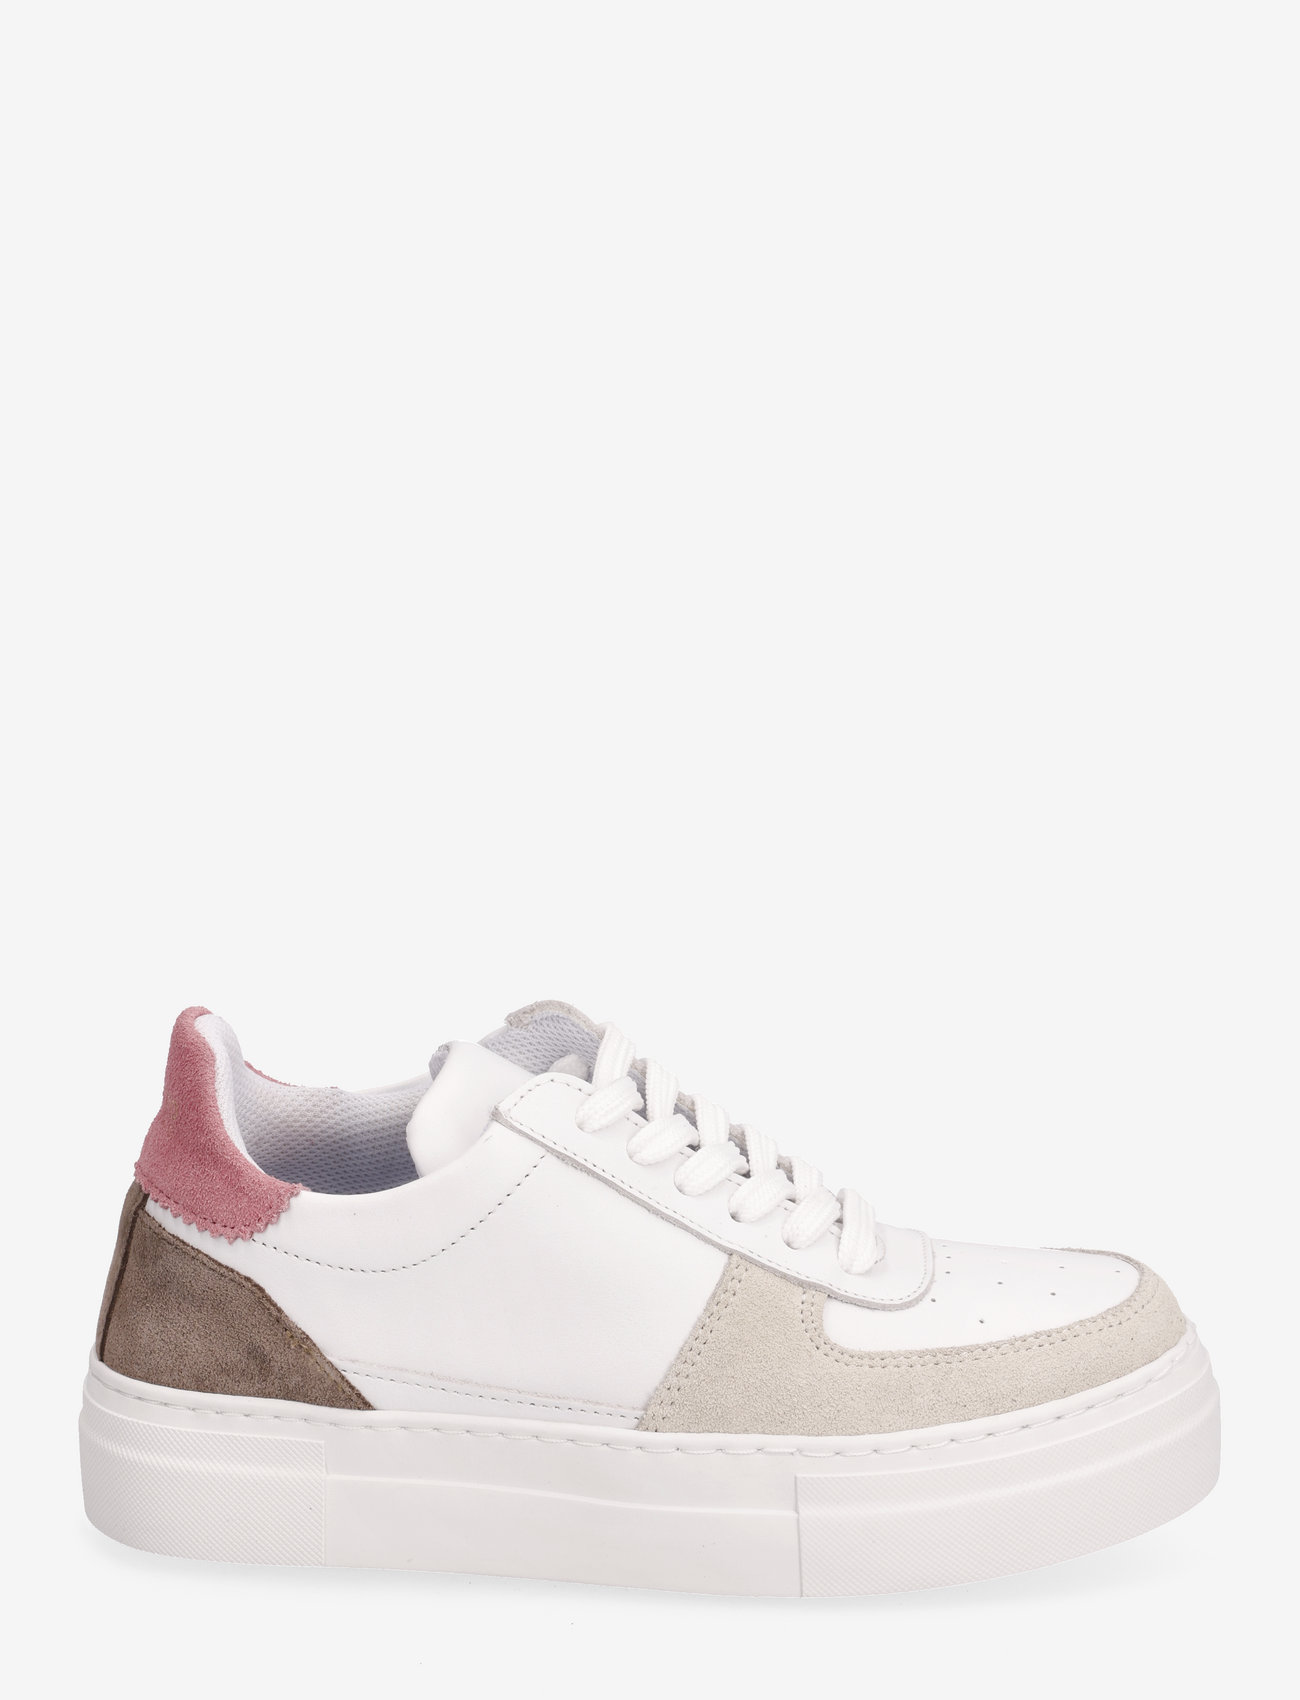 Selected Femme - SLFHARPER MIX TRAINER - sneakersy niskie - sweet lilac - 1